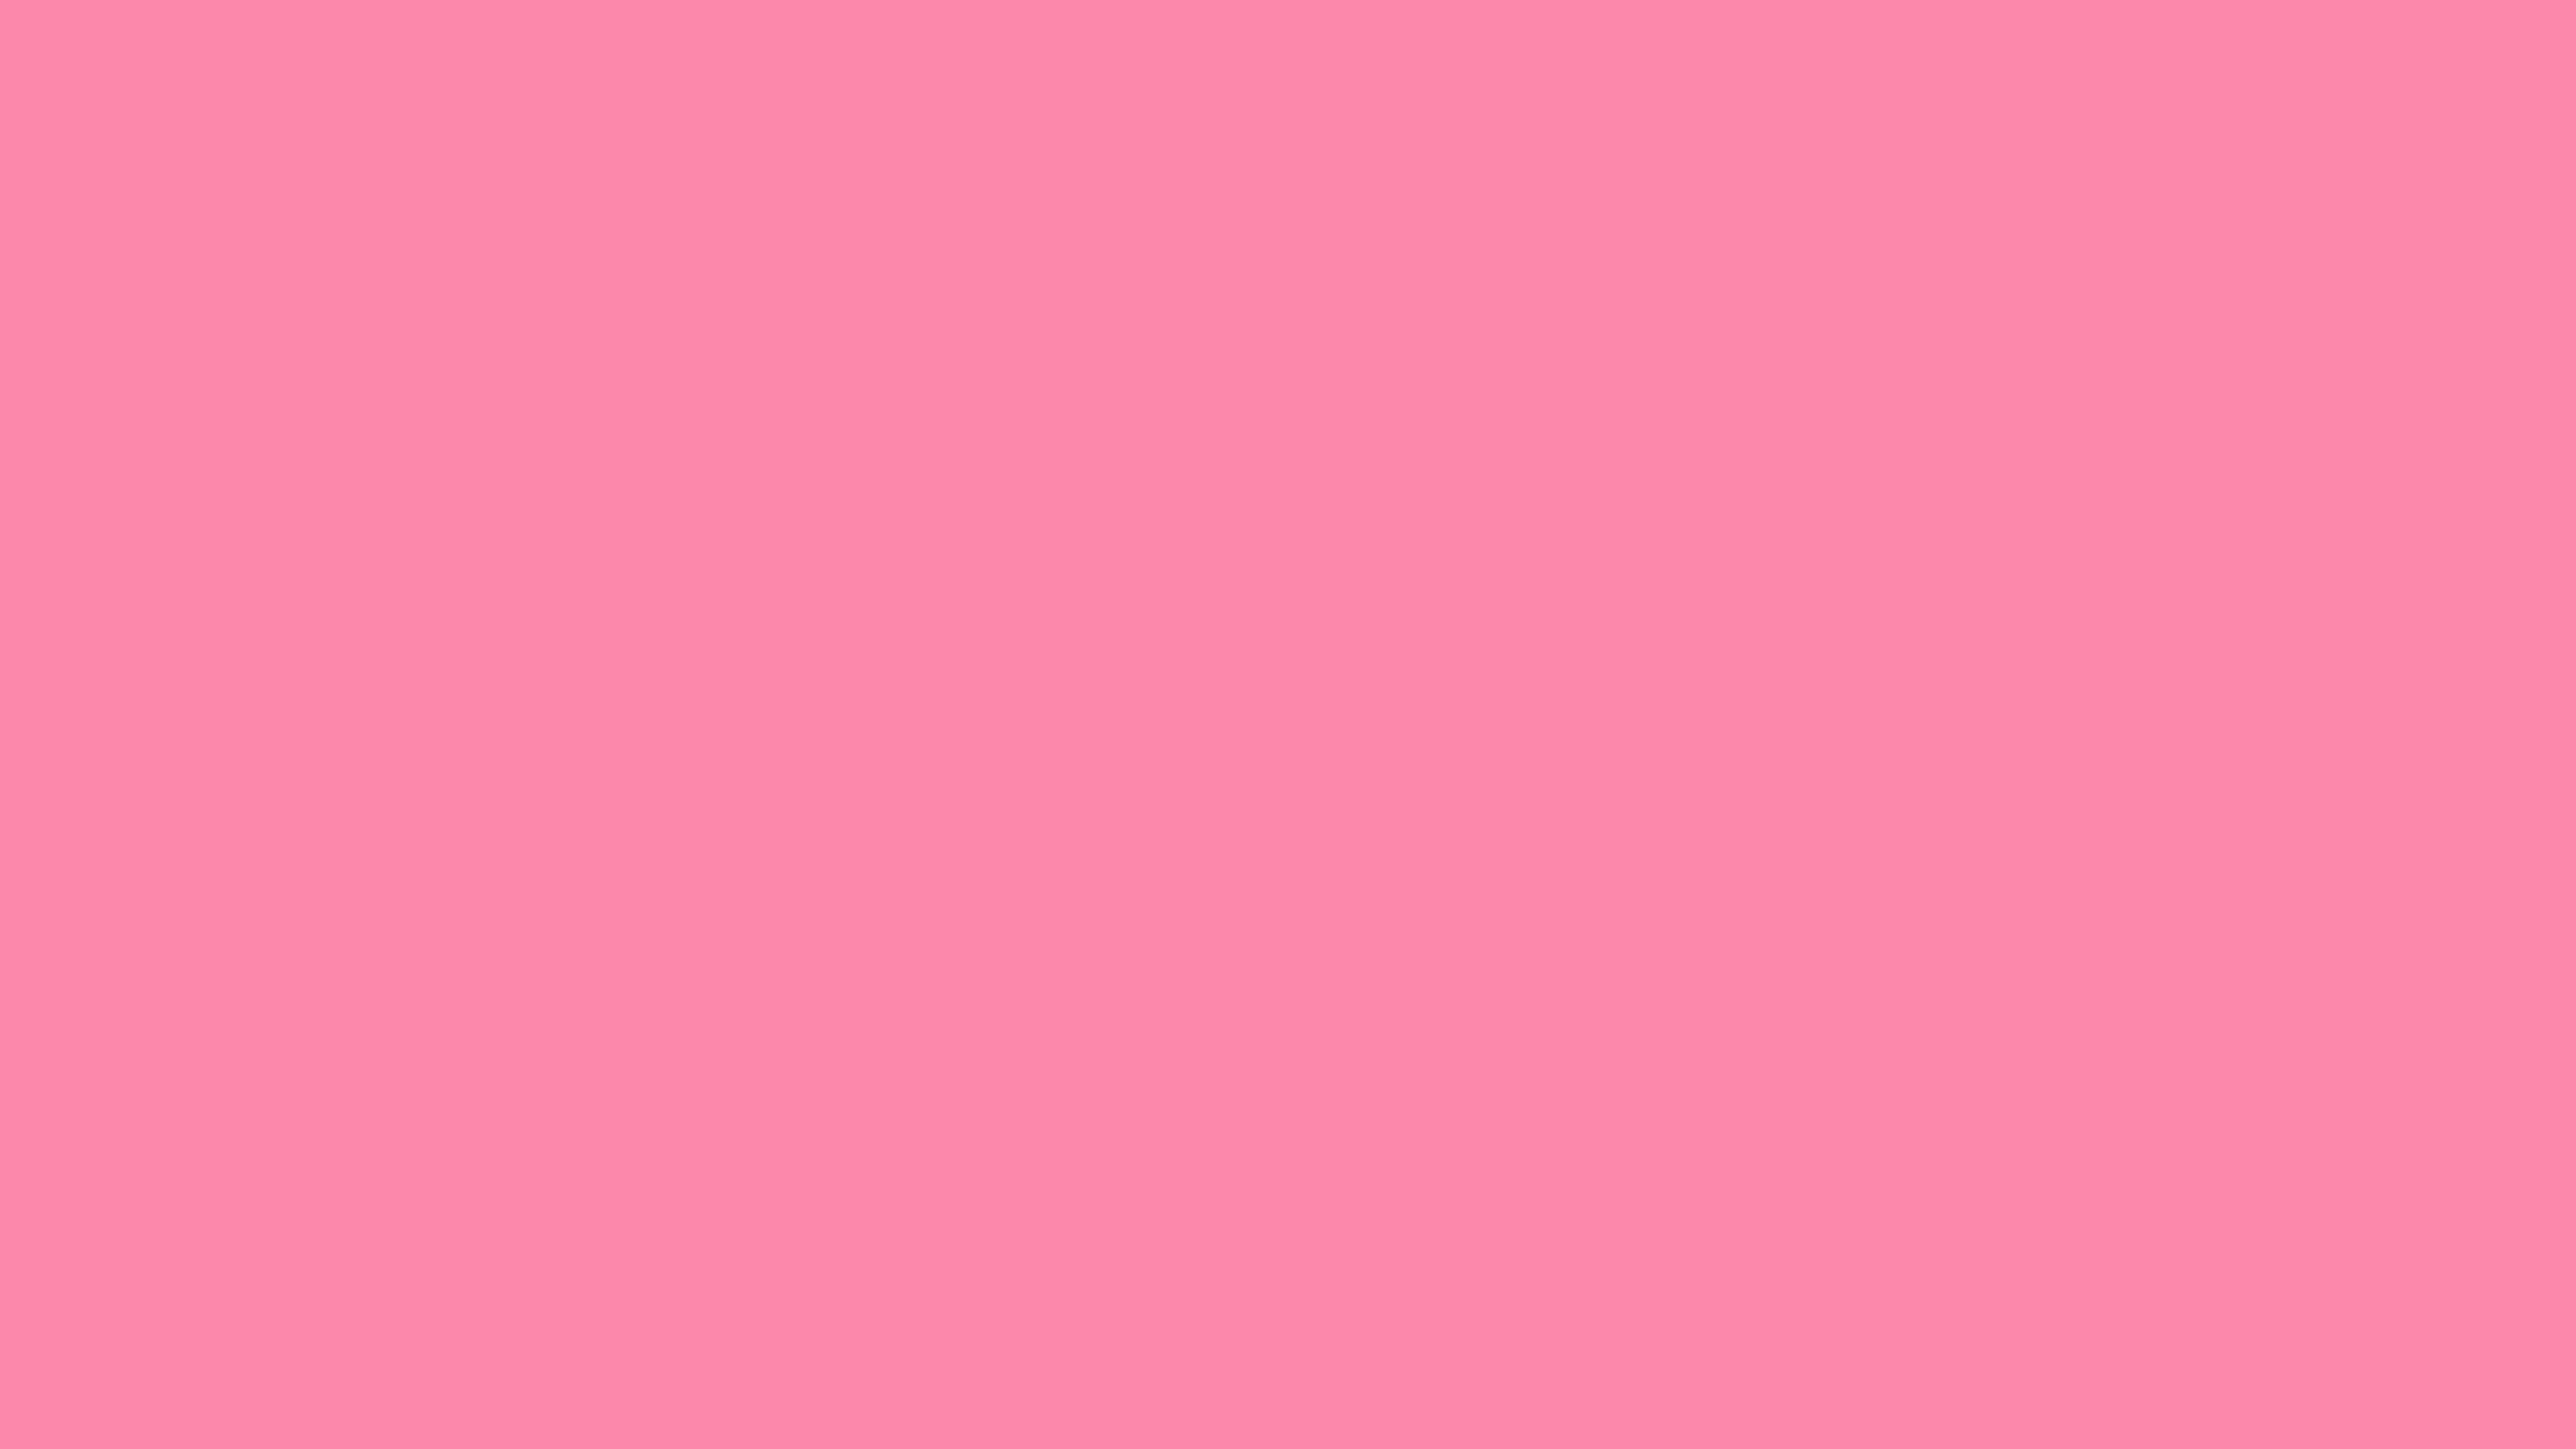 5120x2880 Tickle Me Pink Solid Color Background